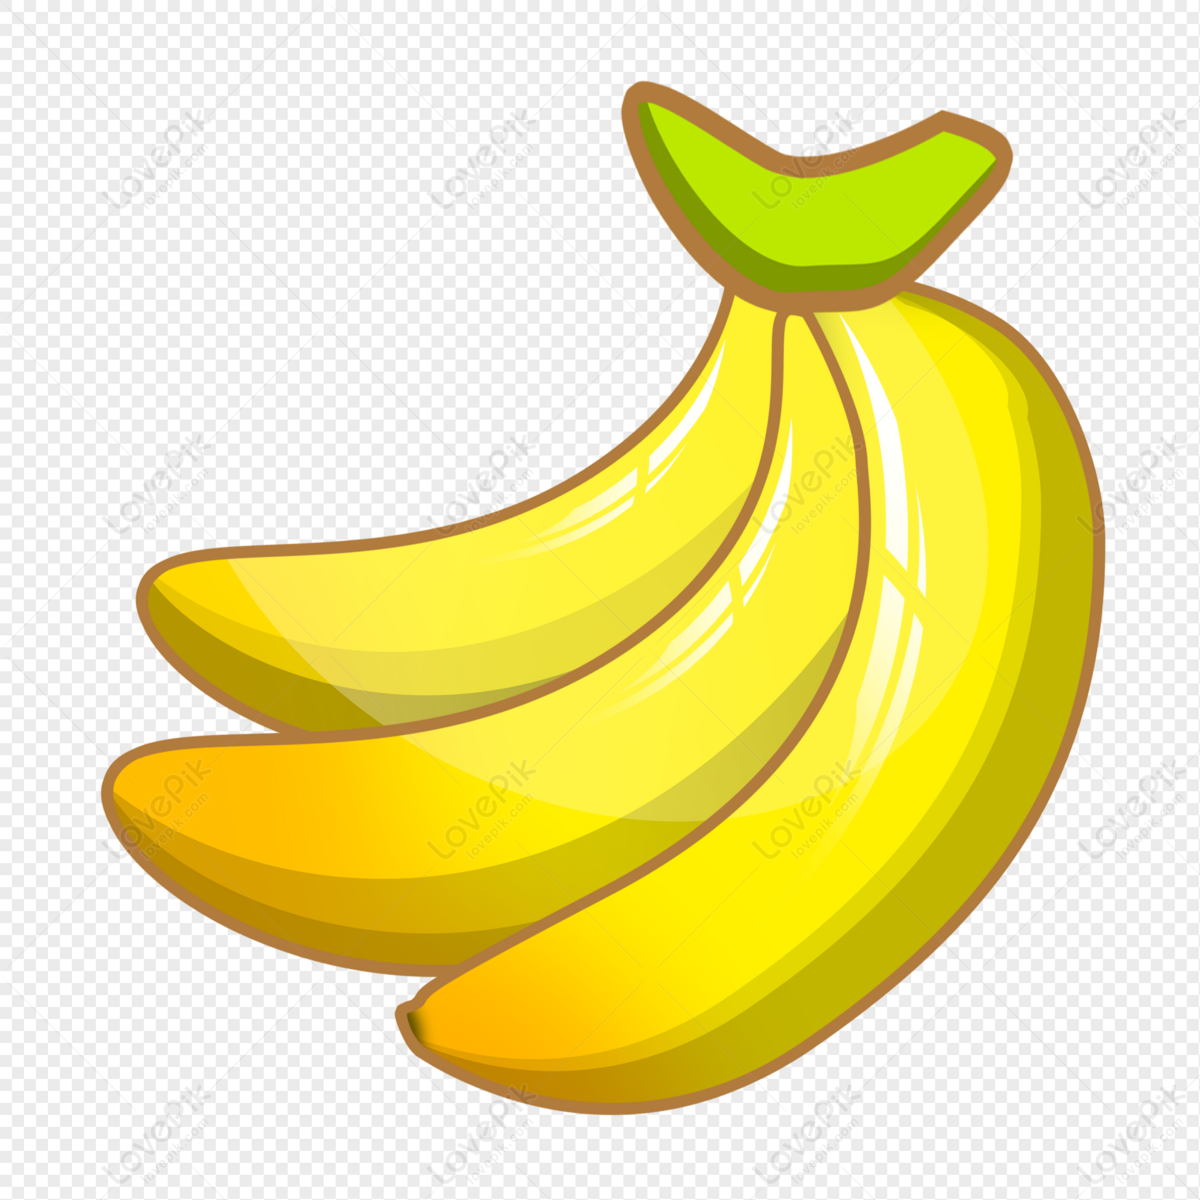 Banana PNG Transparent Image And Clipart Image For Free Download ...